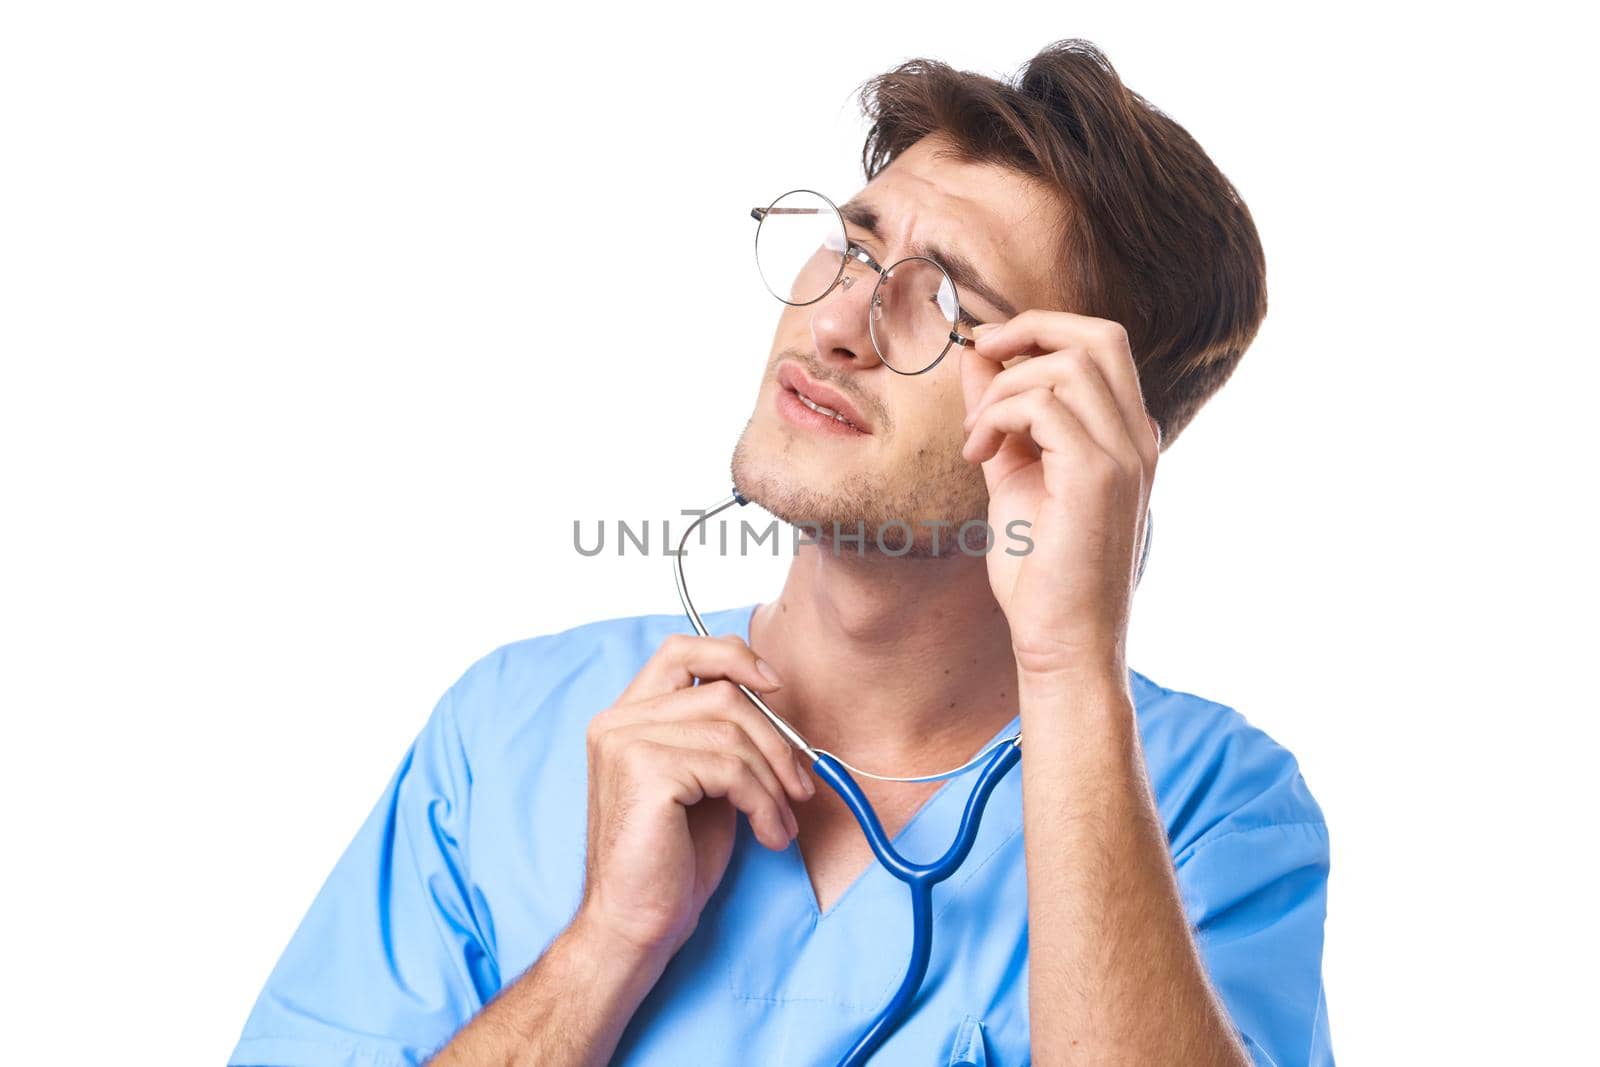 man in medical uniform health care treatment stethoscope examination isolated background by Vichizh